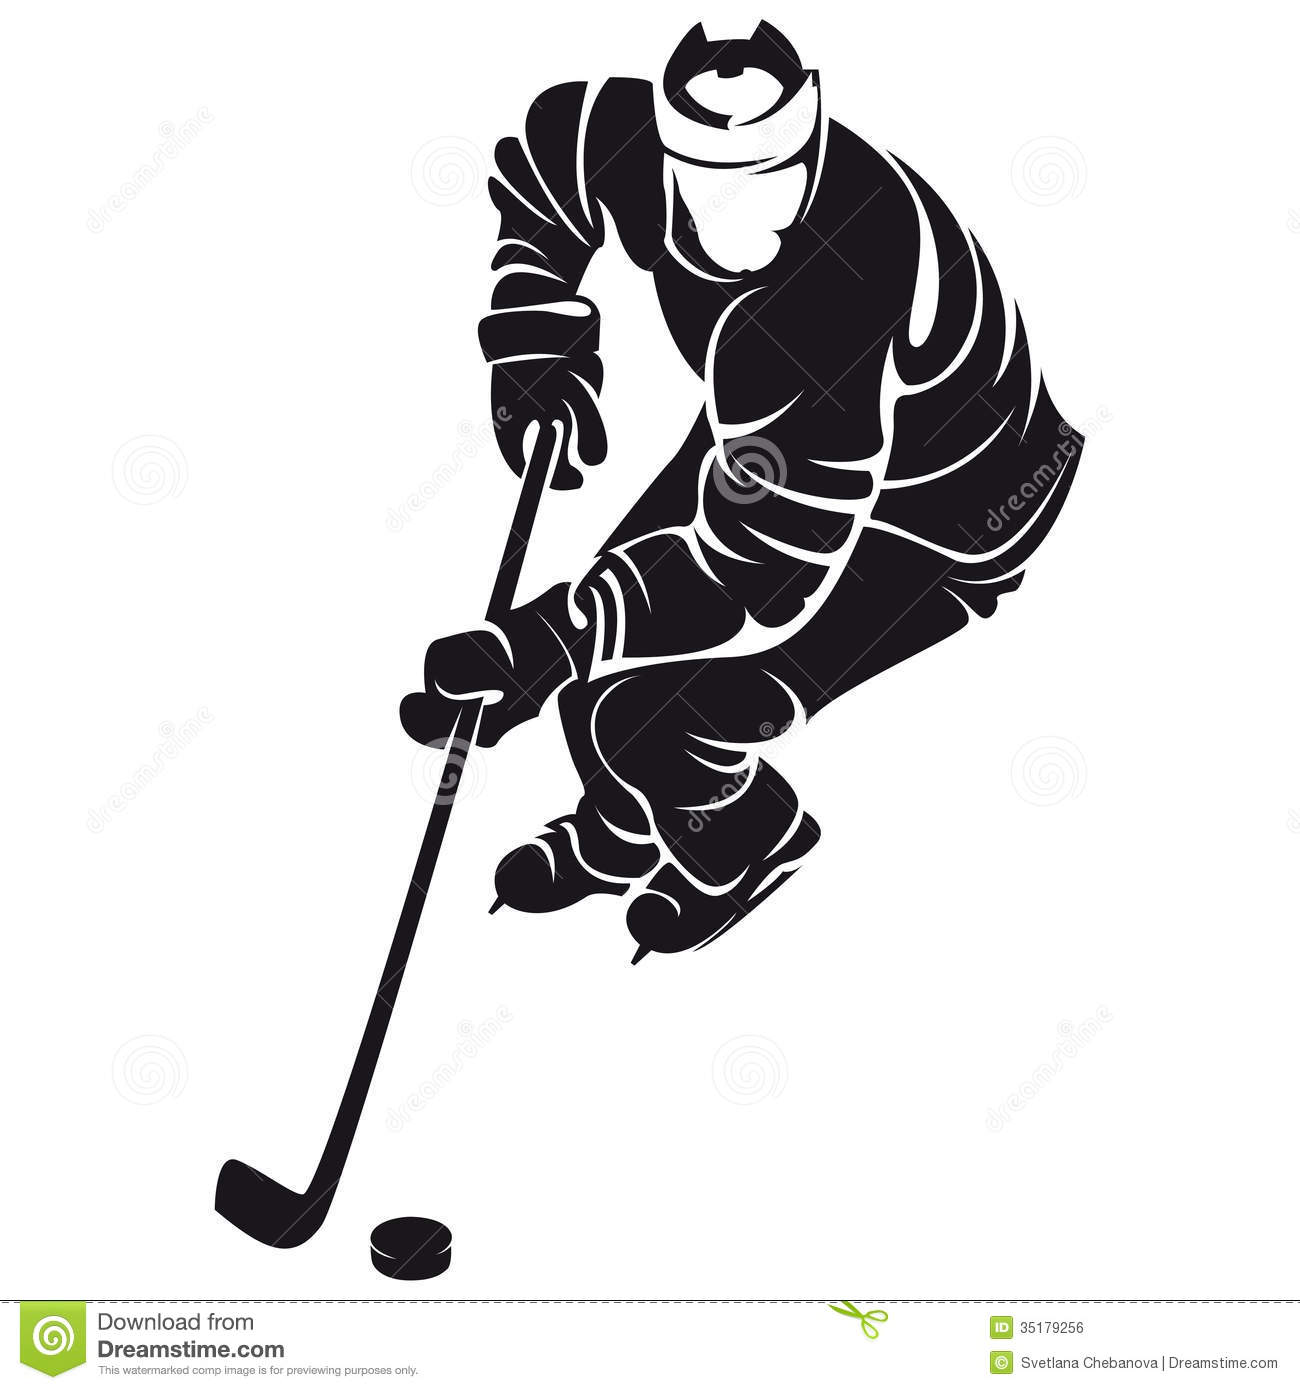 Hockey Player Clipart Black And White Hockey Player Silhouette